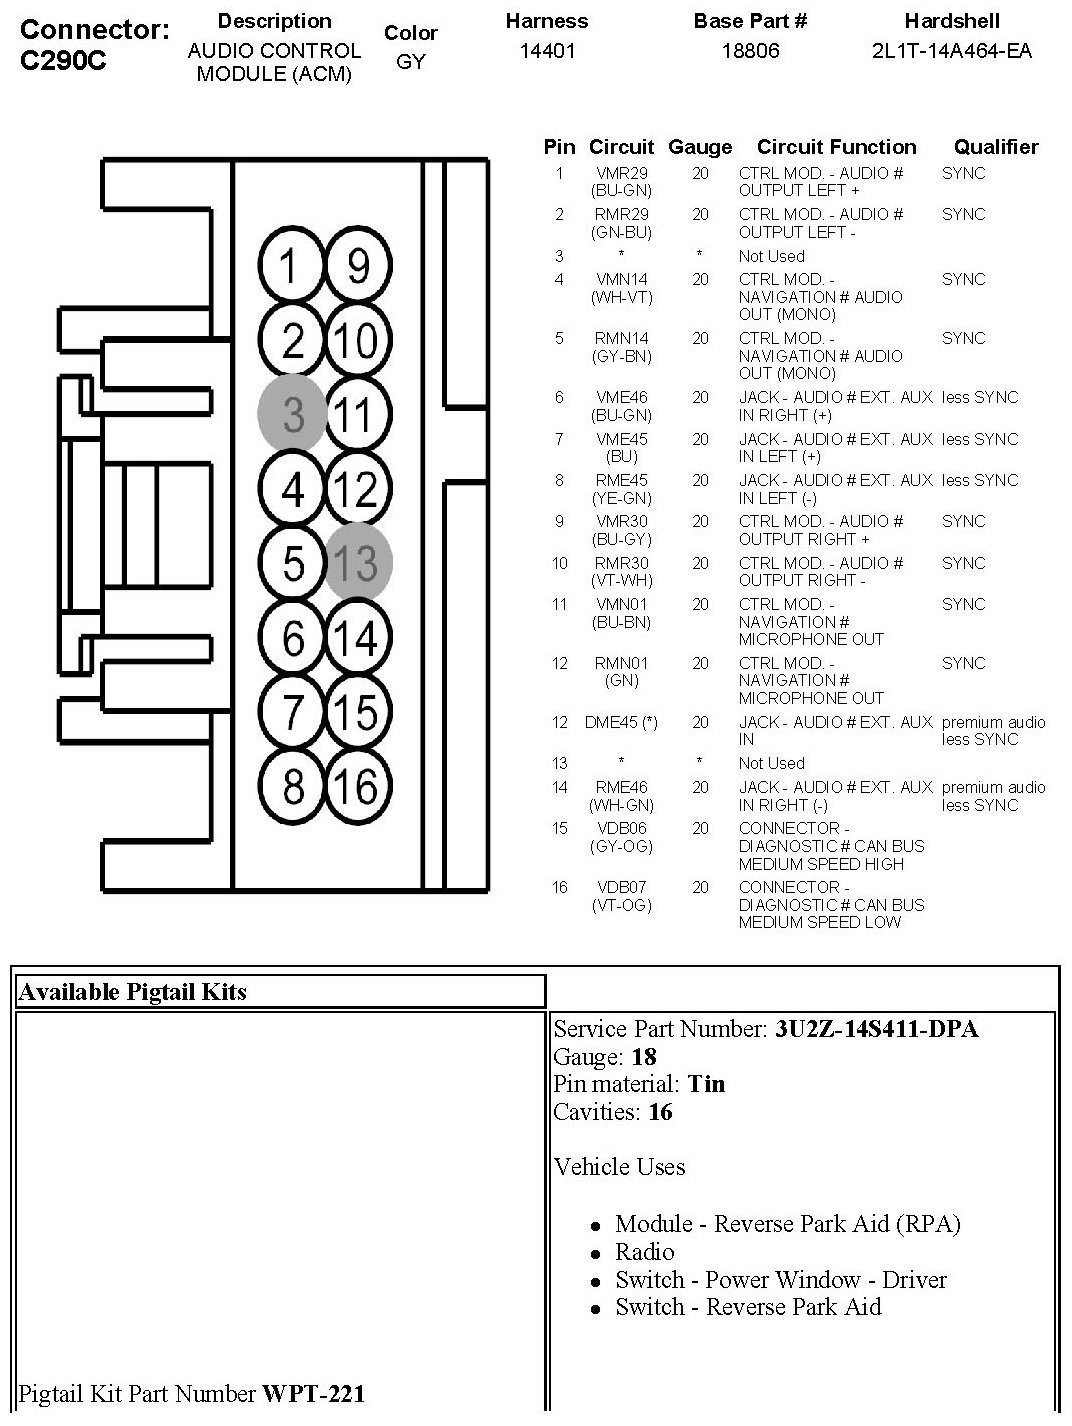 Connecting Wires To Terminals | Kenwood Kdc-Hd545U User Manual